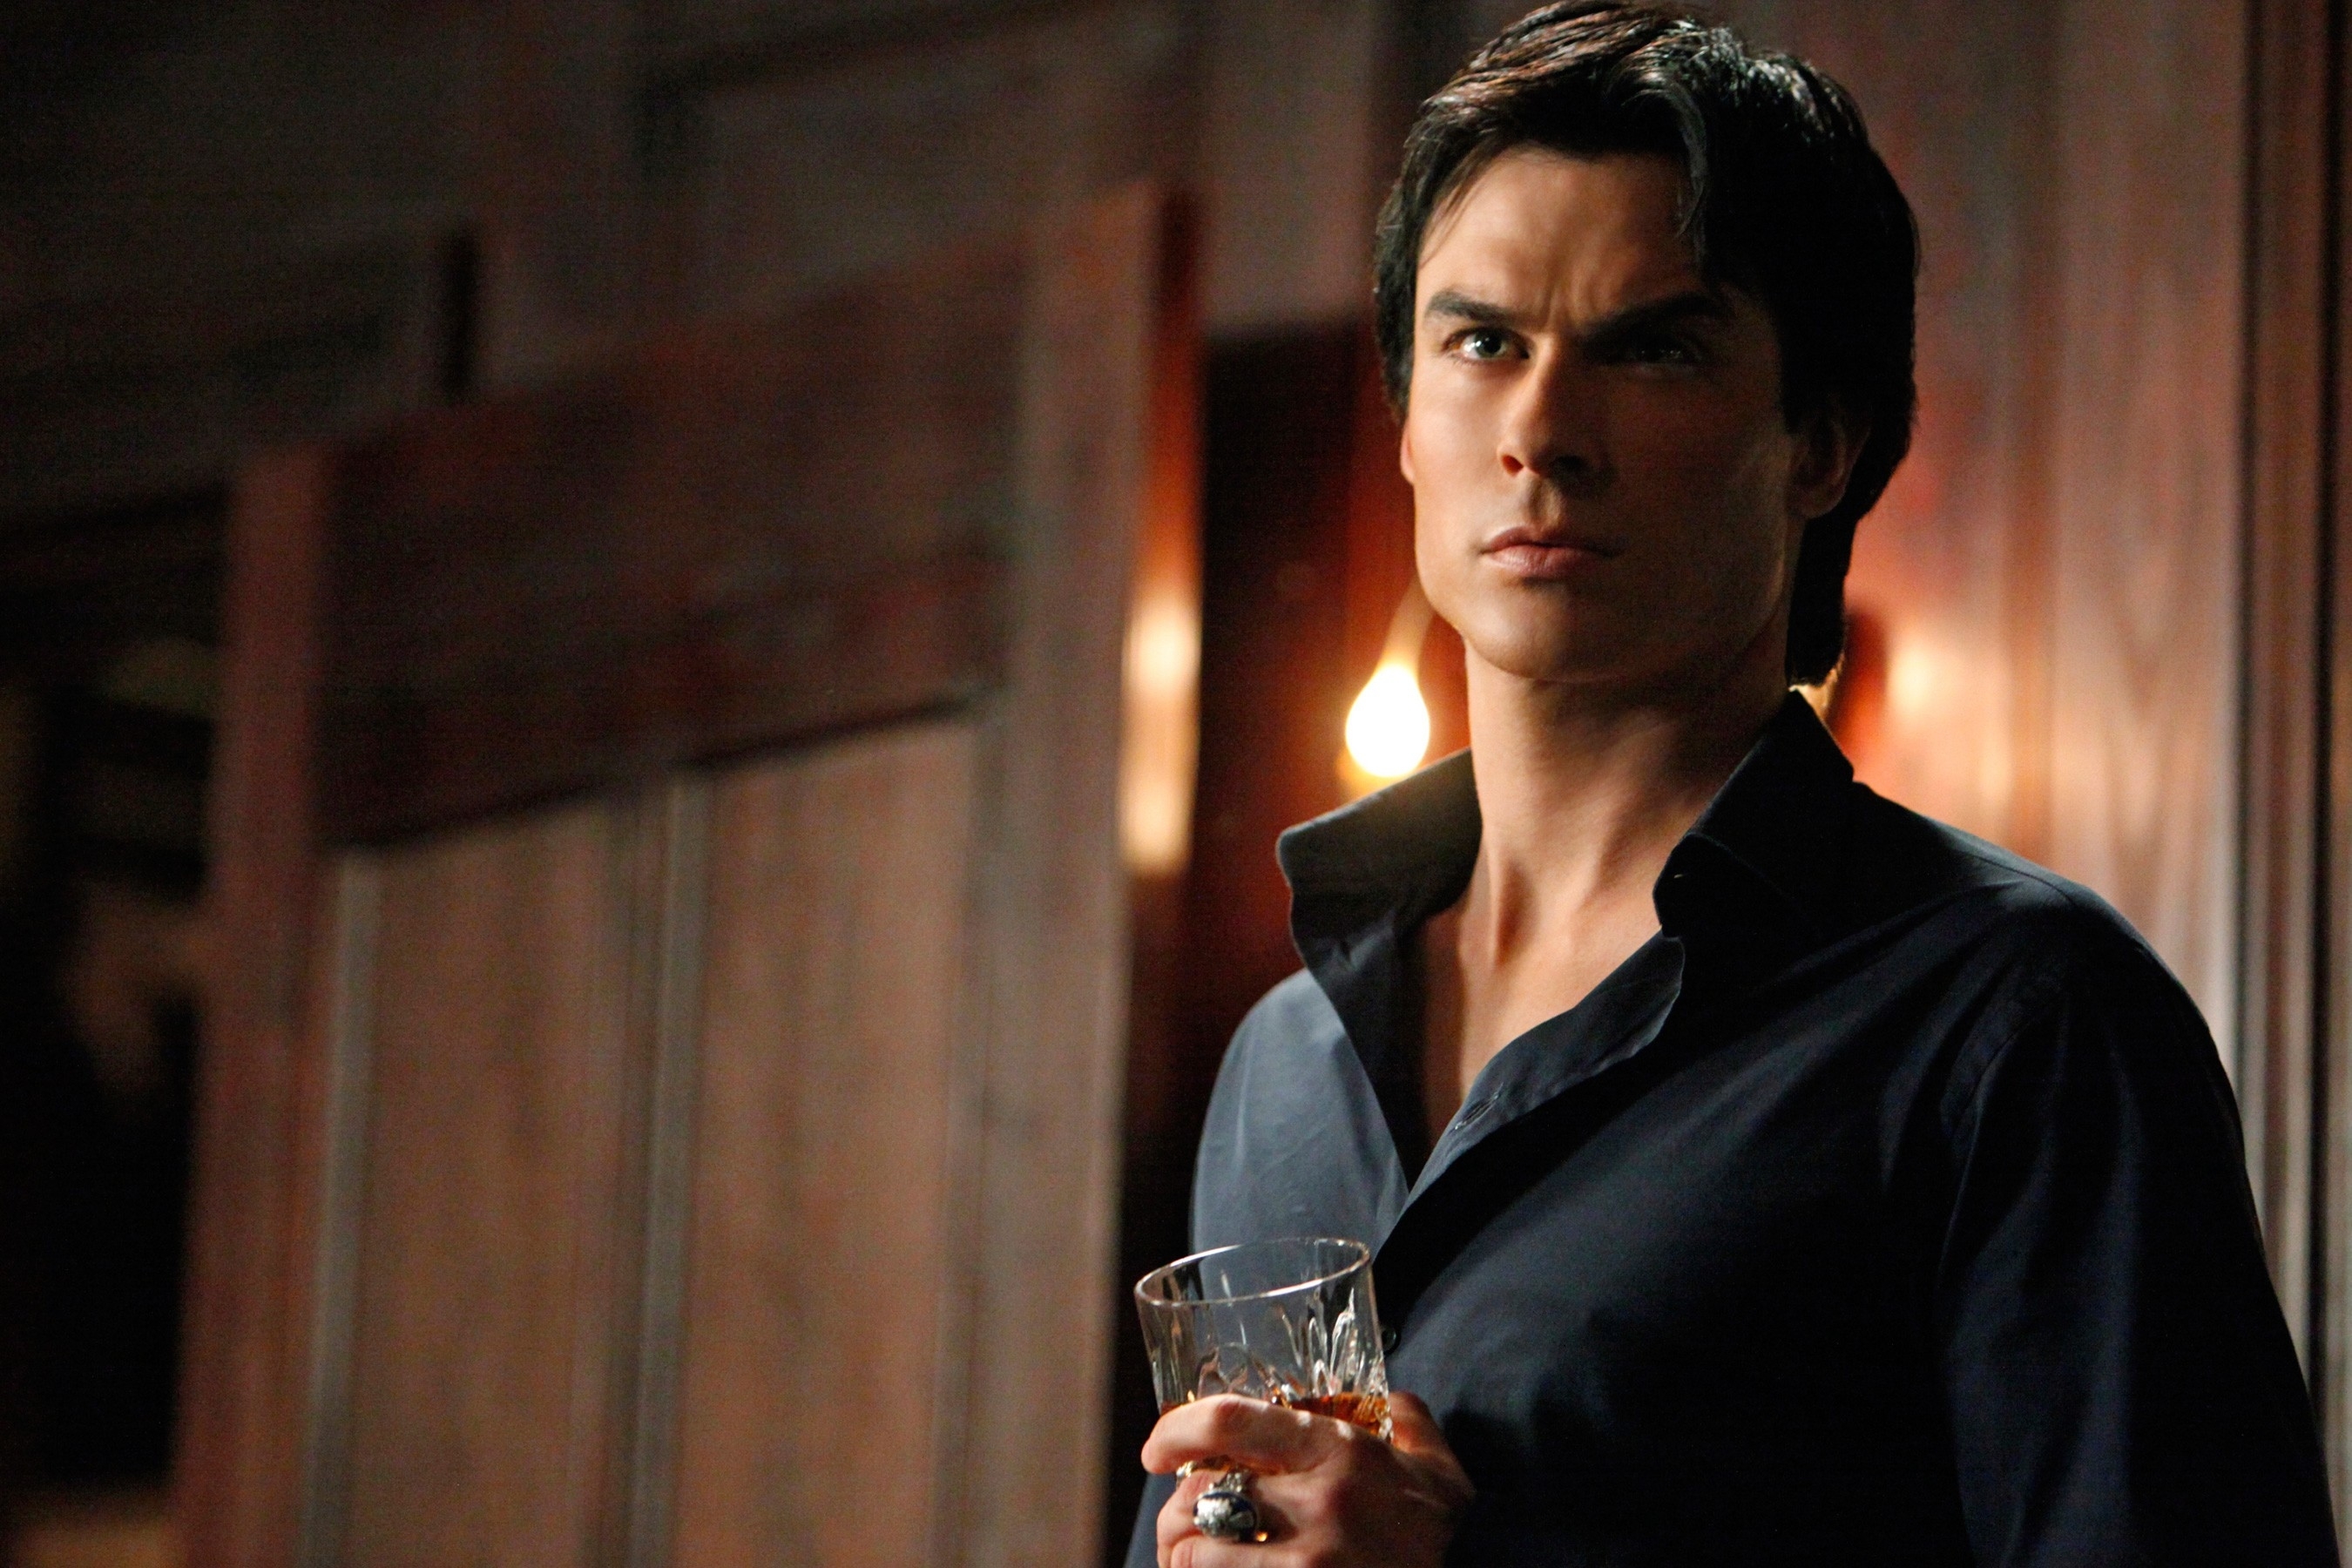 Ian Somerhalder in character as Damon Salvatore from &quot;The Vampire Diaries,&quot; holding a glass